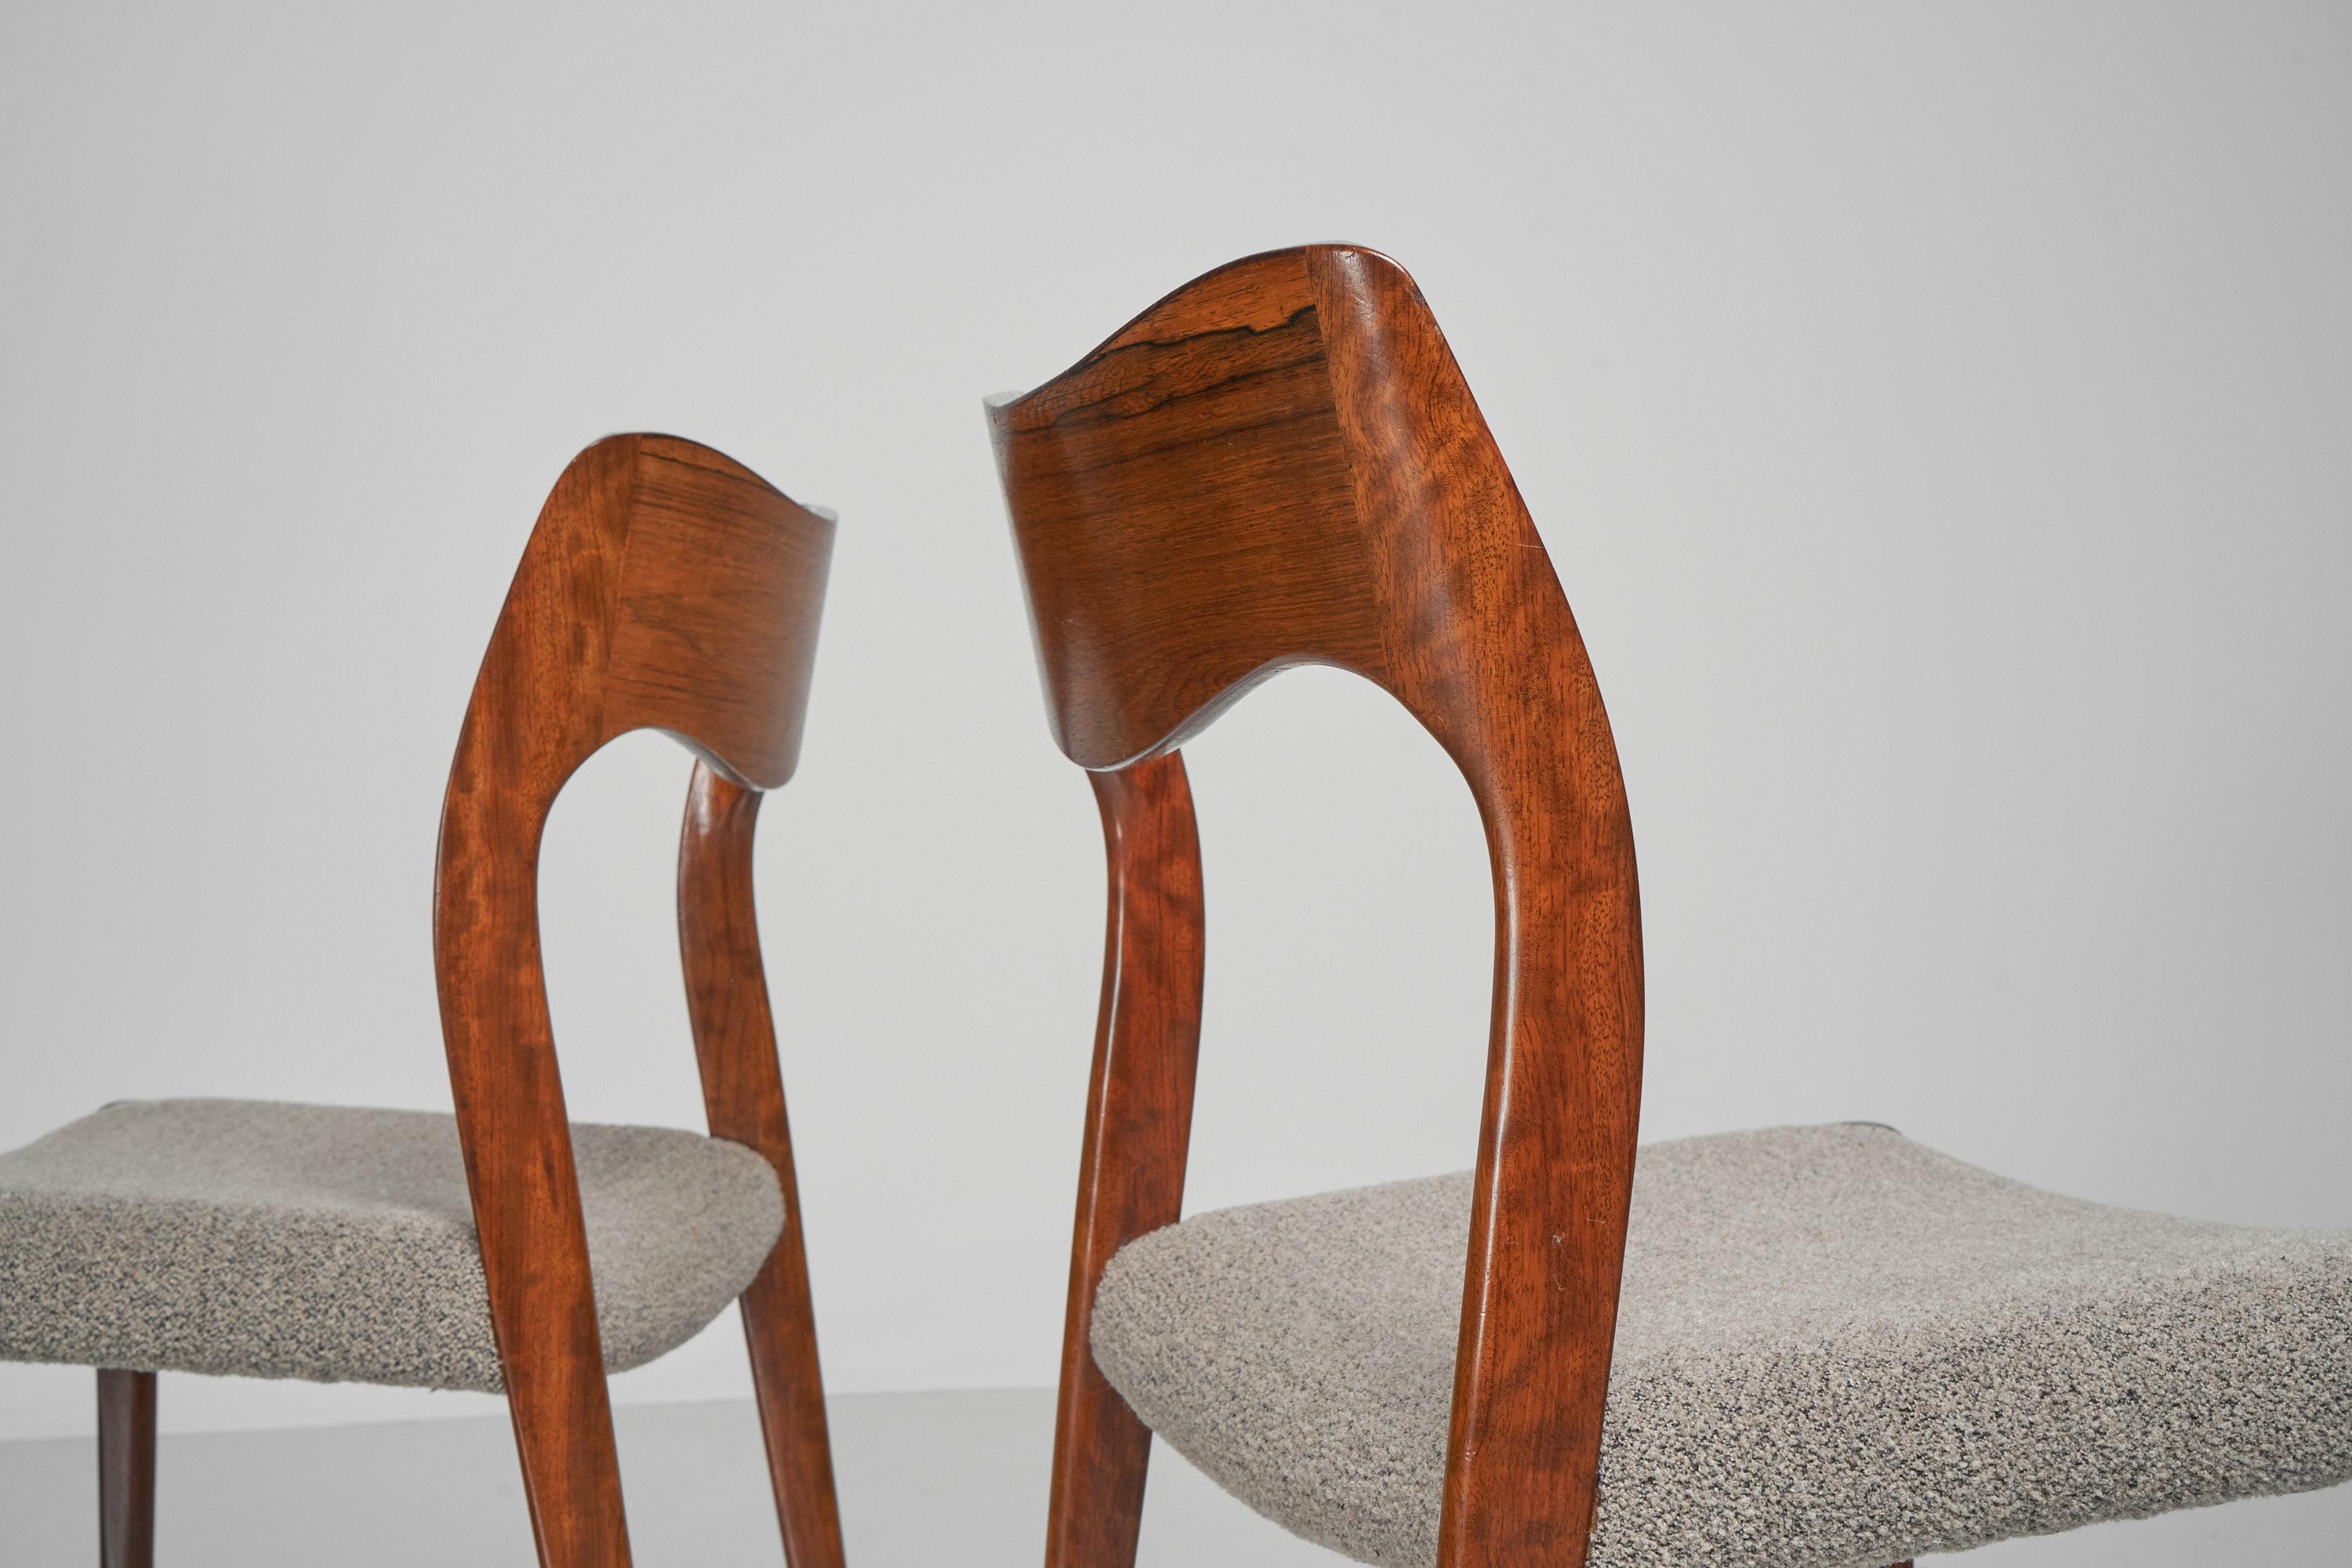 Upholstery Niels Moller Dining Chairs 6x, Denmark, 1951